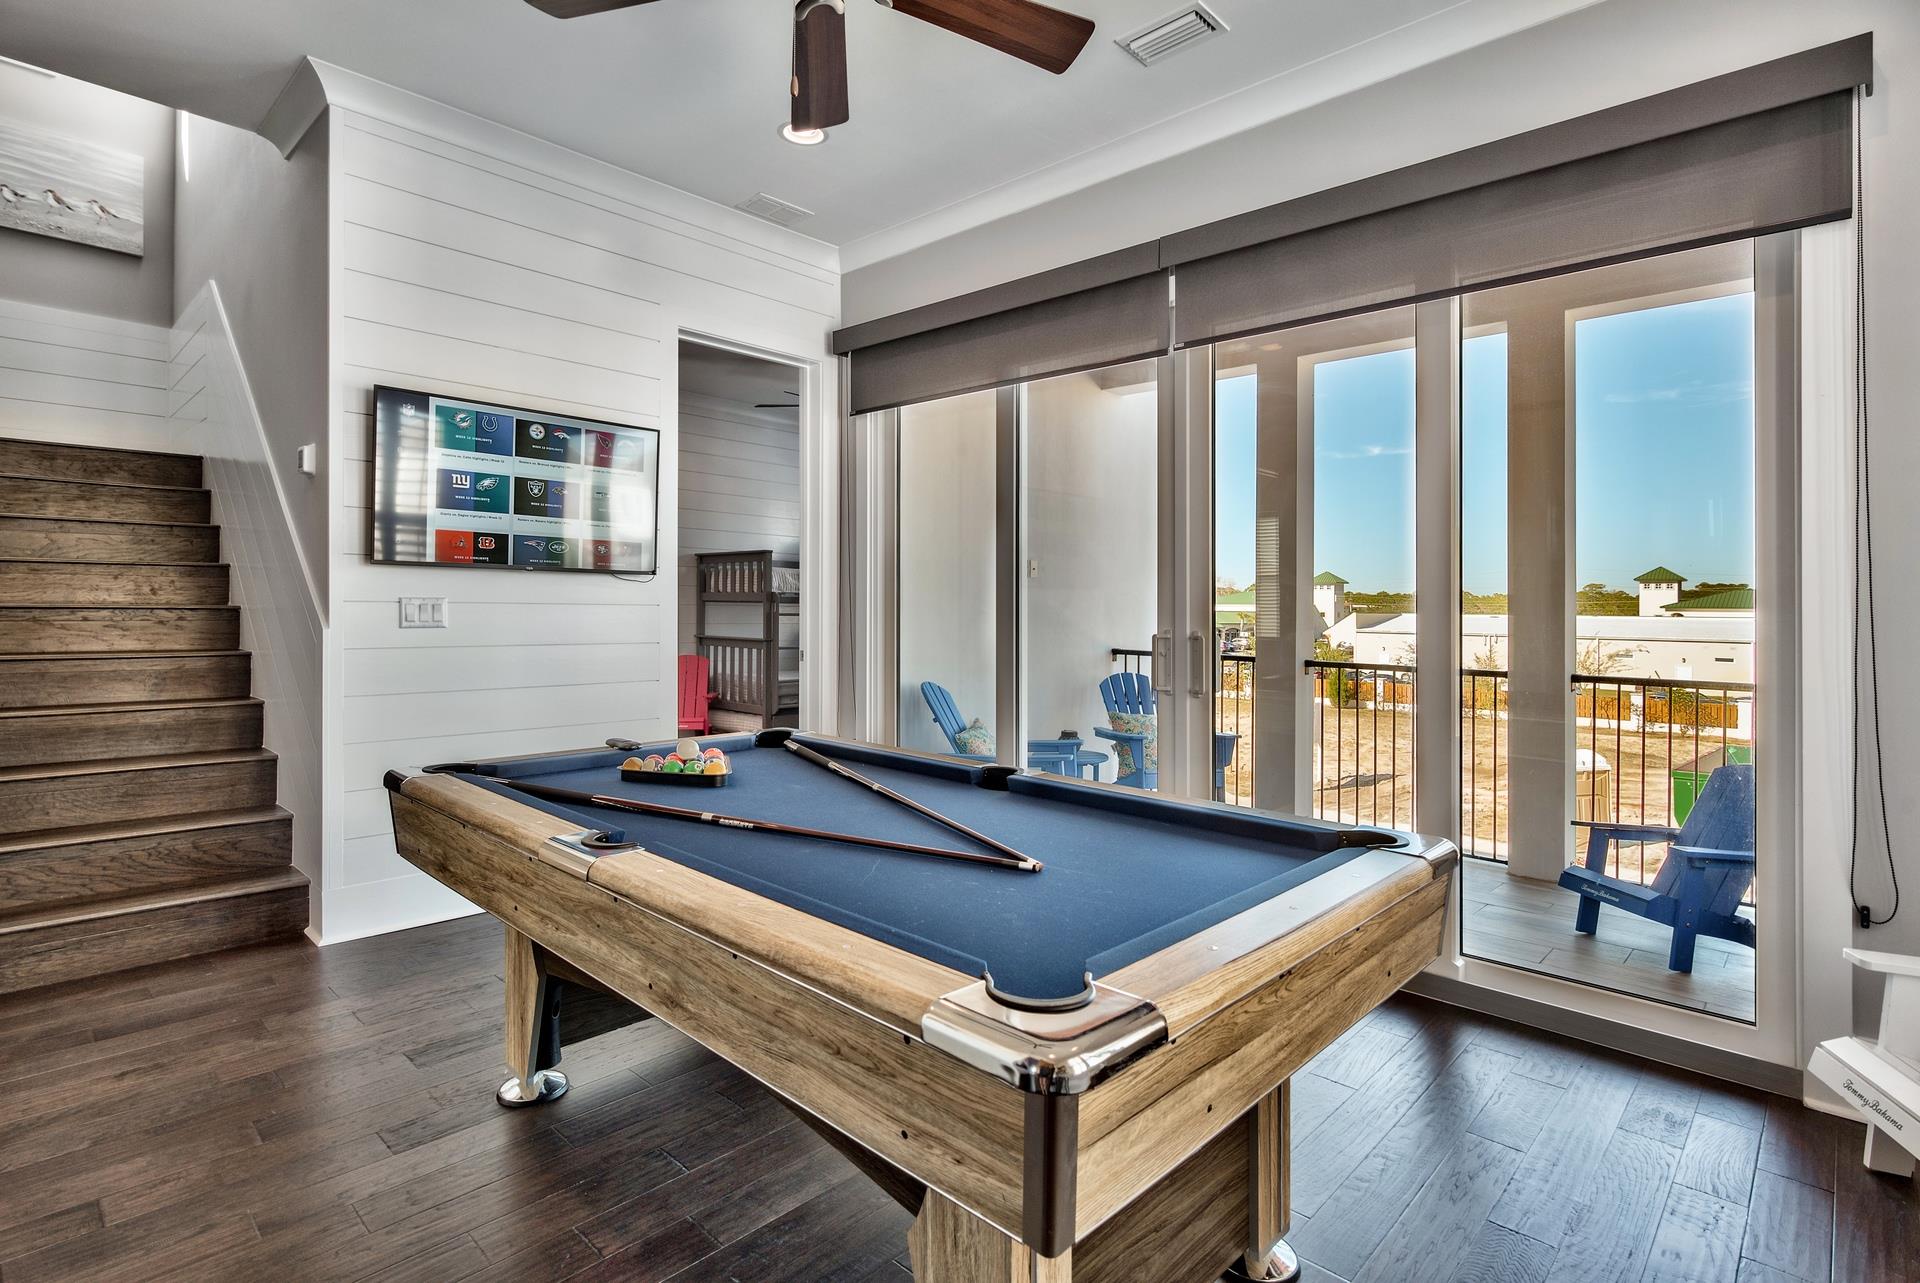 Second floor Pool table with big screen 4K T.V.